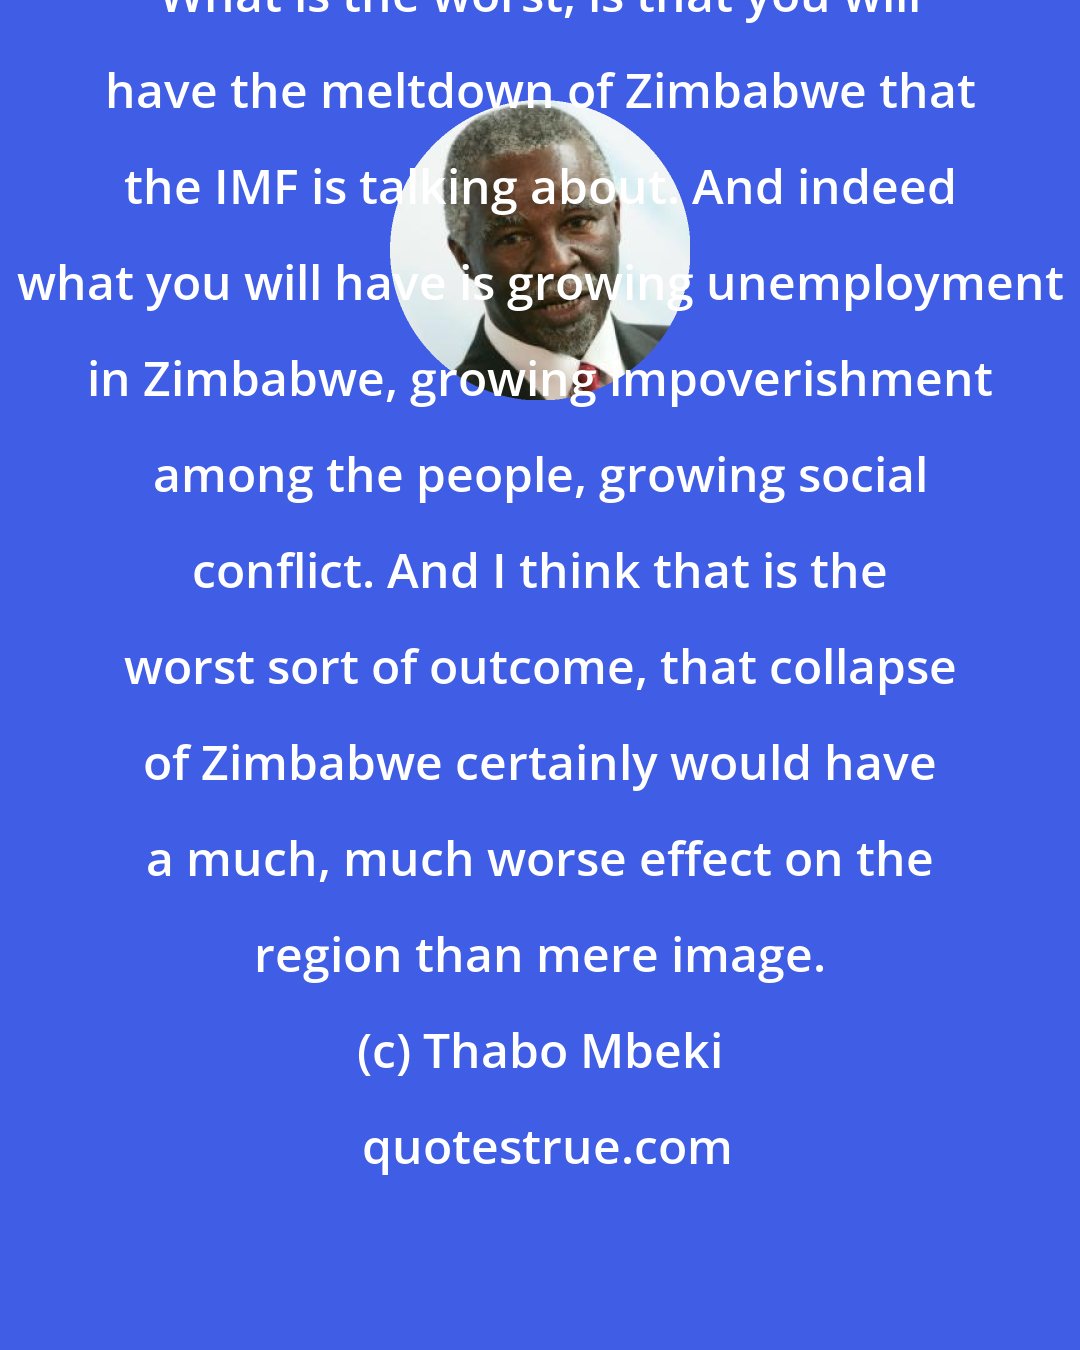 Thabo Mbeki: What is the worst, is that you will have the meltdown of Zimbabwe that the IMF is talking about. And indeed what you will have is growing unemployment in Zimbabwe, growing impoverishment among the people, growing social conflict. And I think that is the worst sort of outcome, that collapse of Zimbabwe certainly would have a much, much worse effect on the region than mere image.